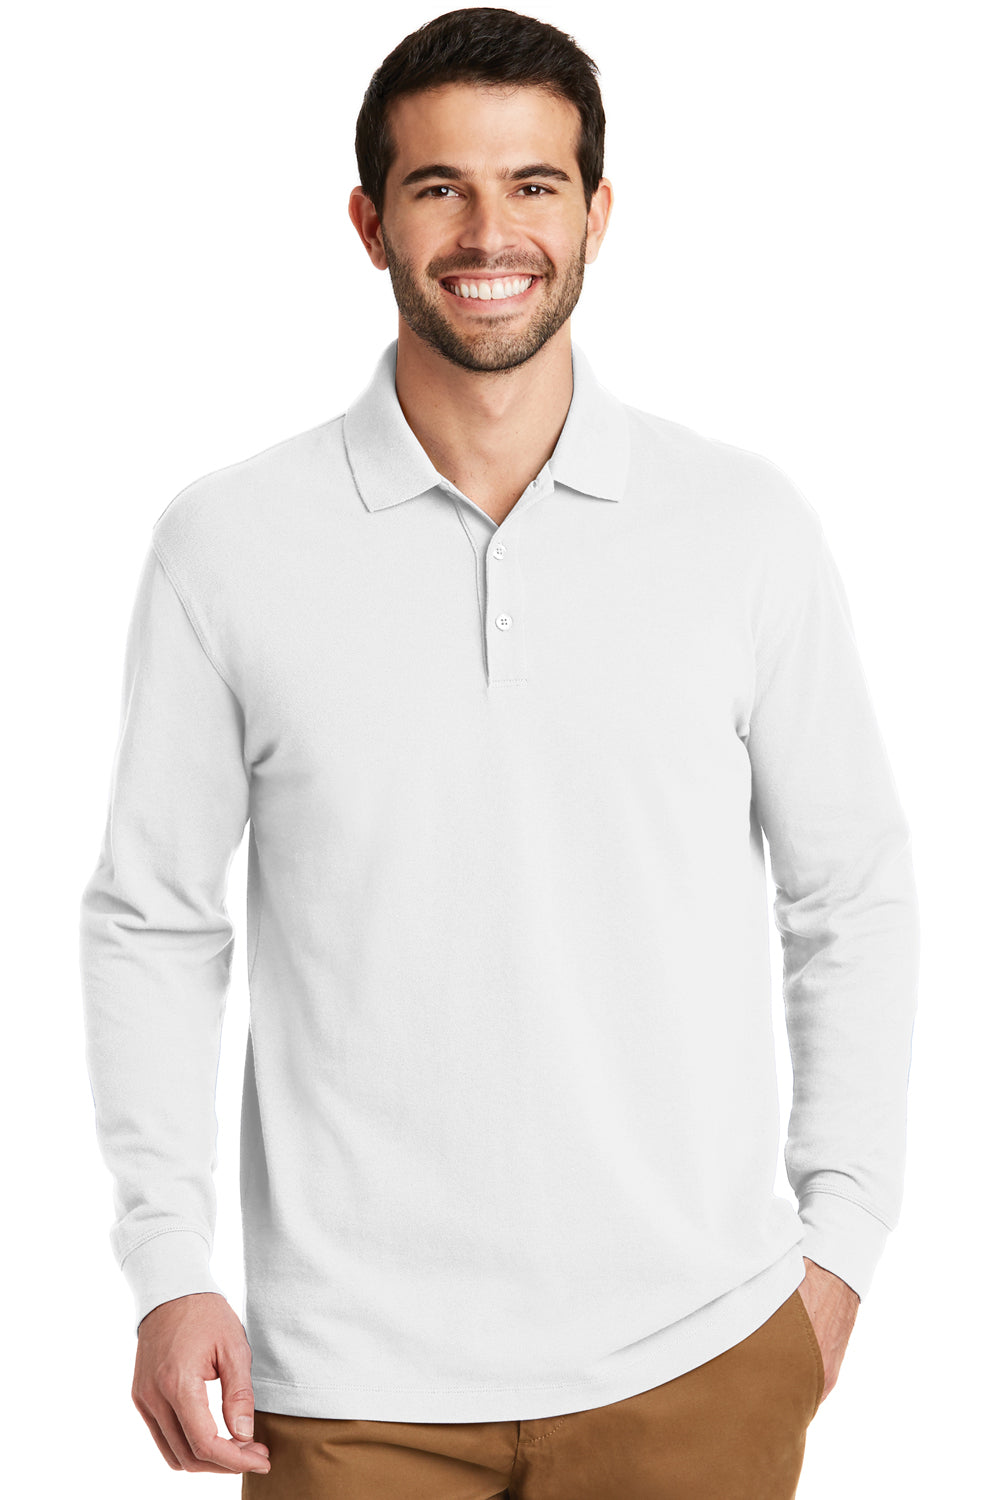 Port Authority K8000LS Mens Wrinkle Resistant Long Sleeve Polo Shirt White Front